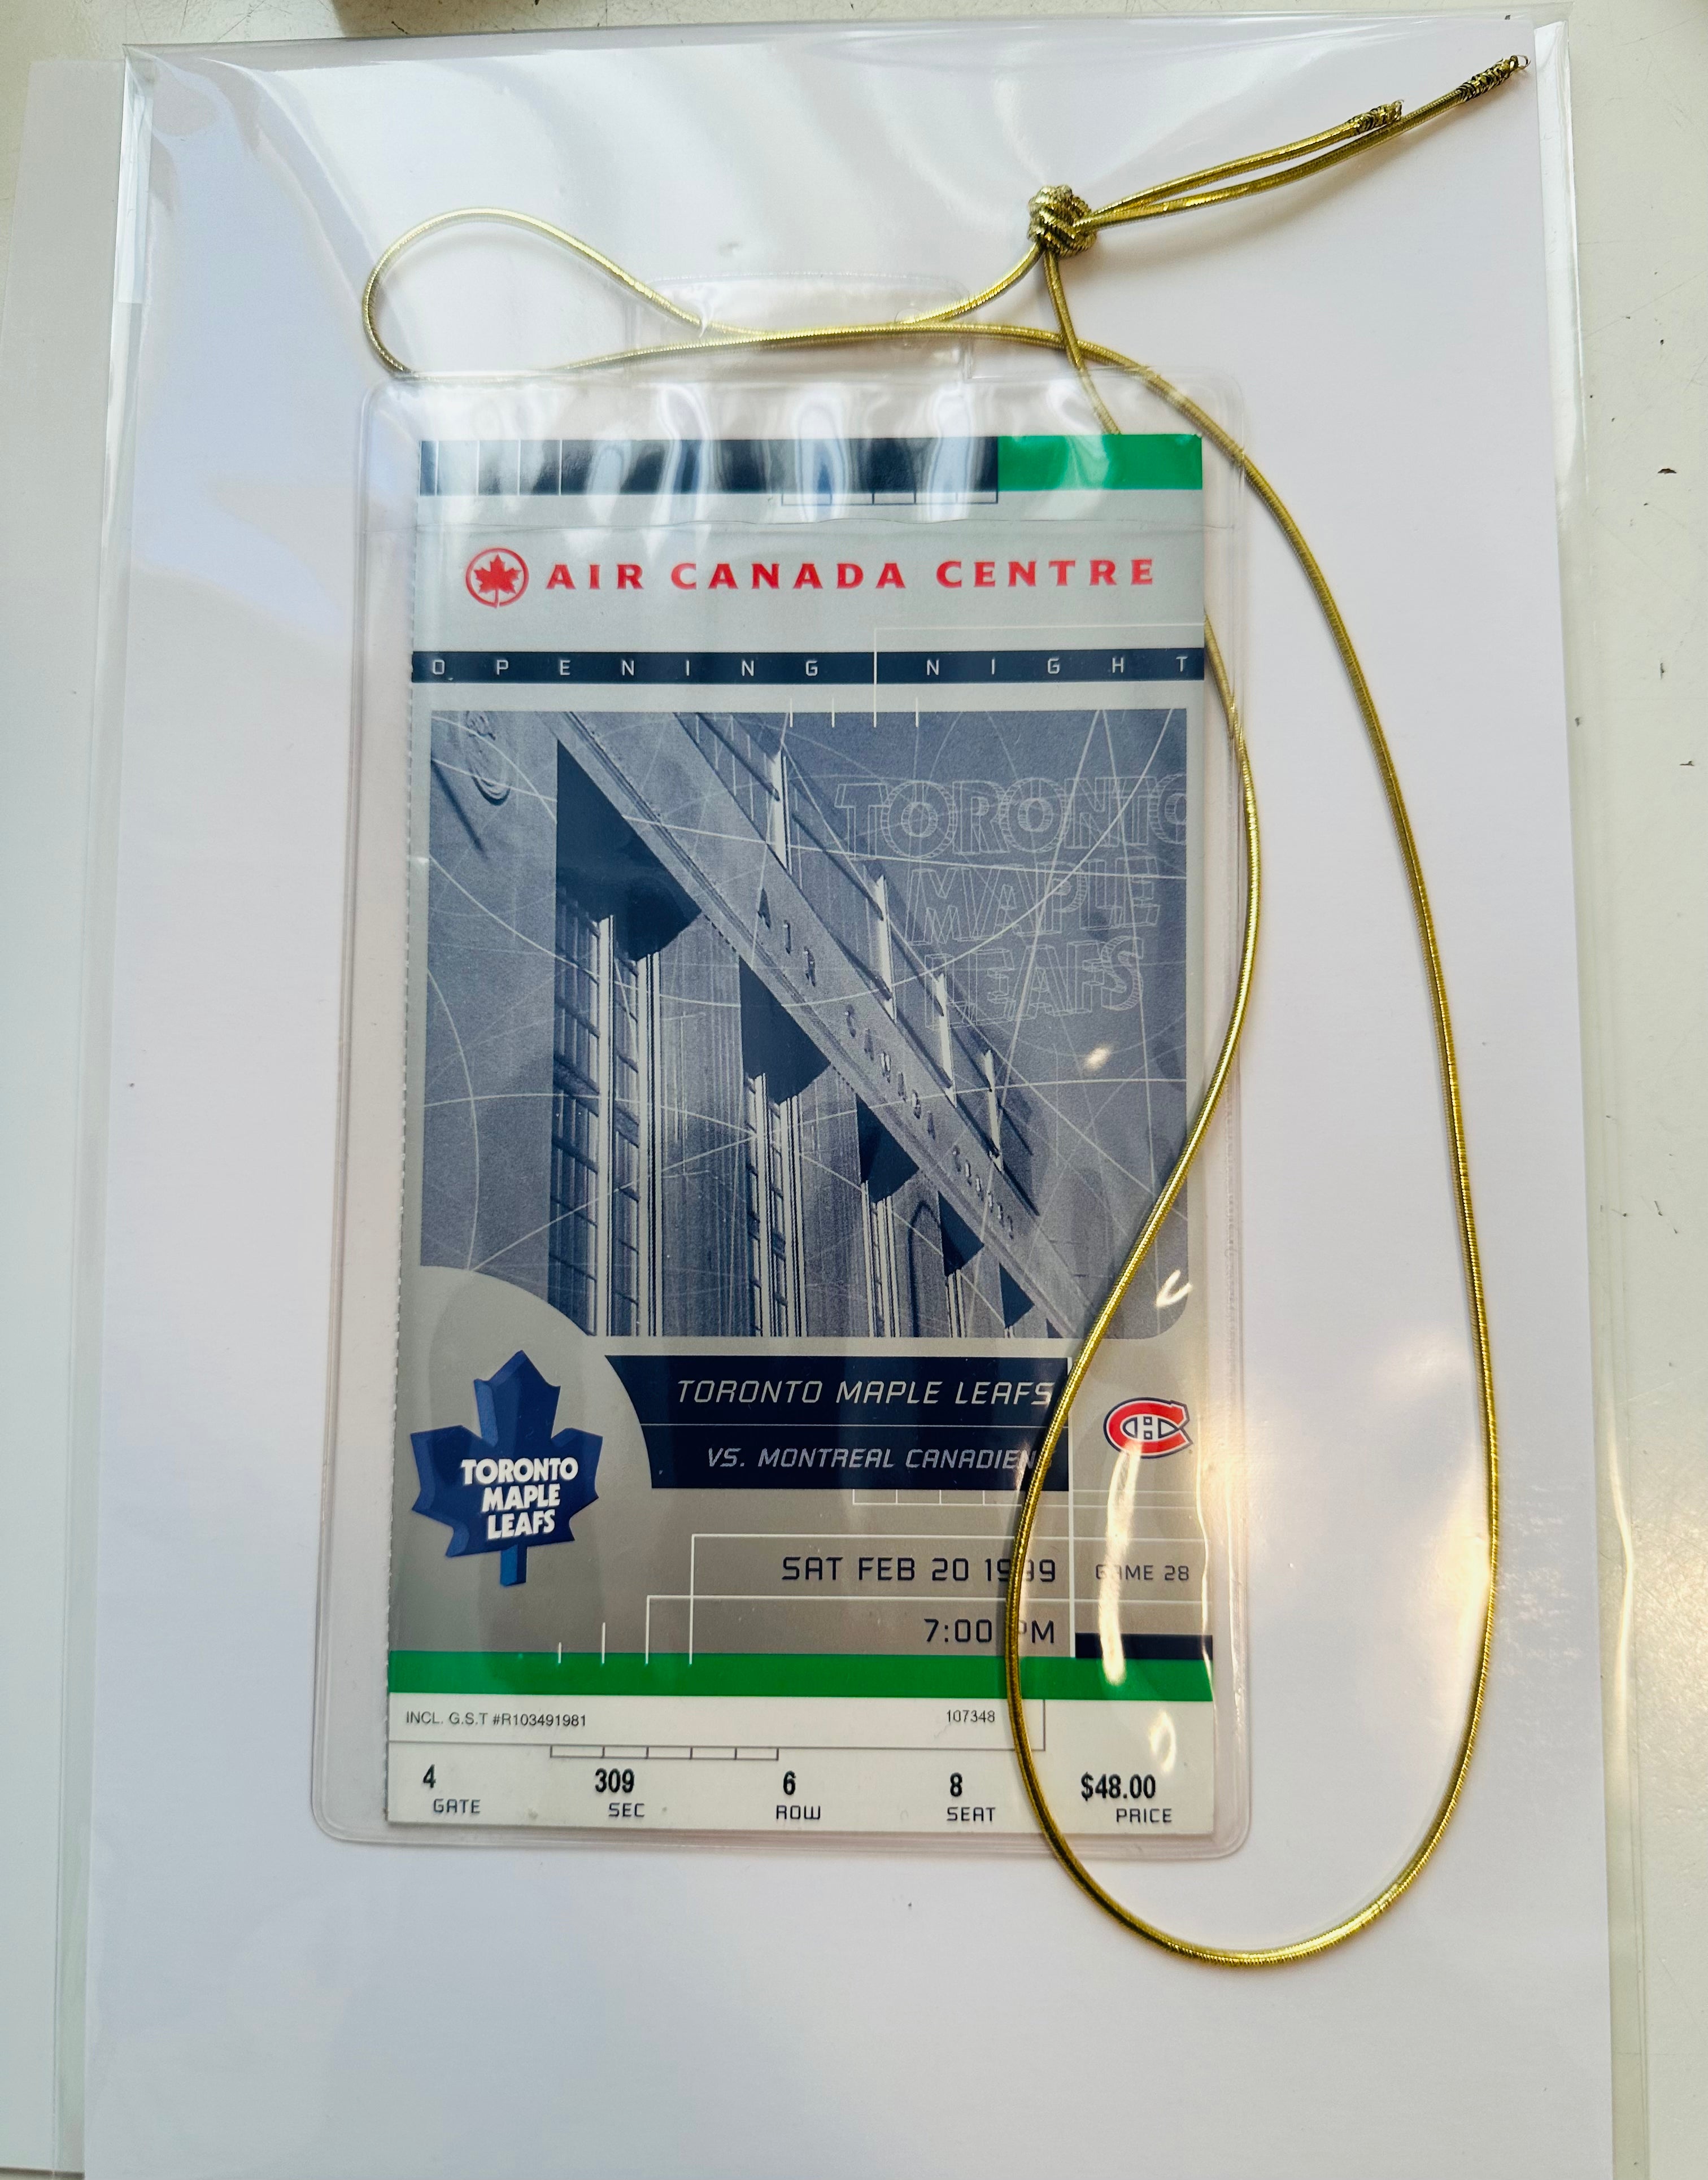 Toronto Maple Leafs first Air Canada center game ticket protected in Lanyard Leafs vs Montreal 1999